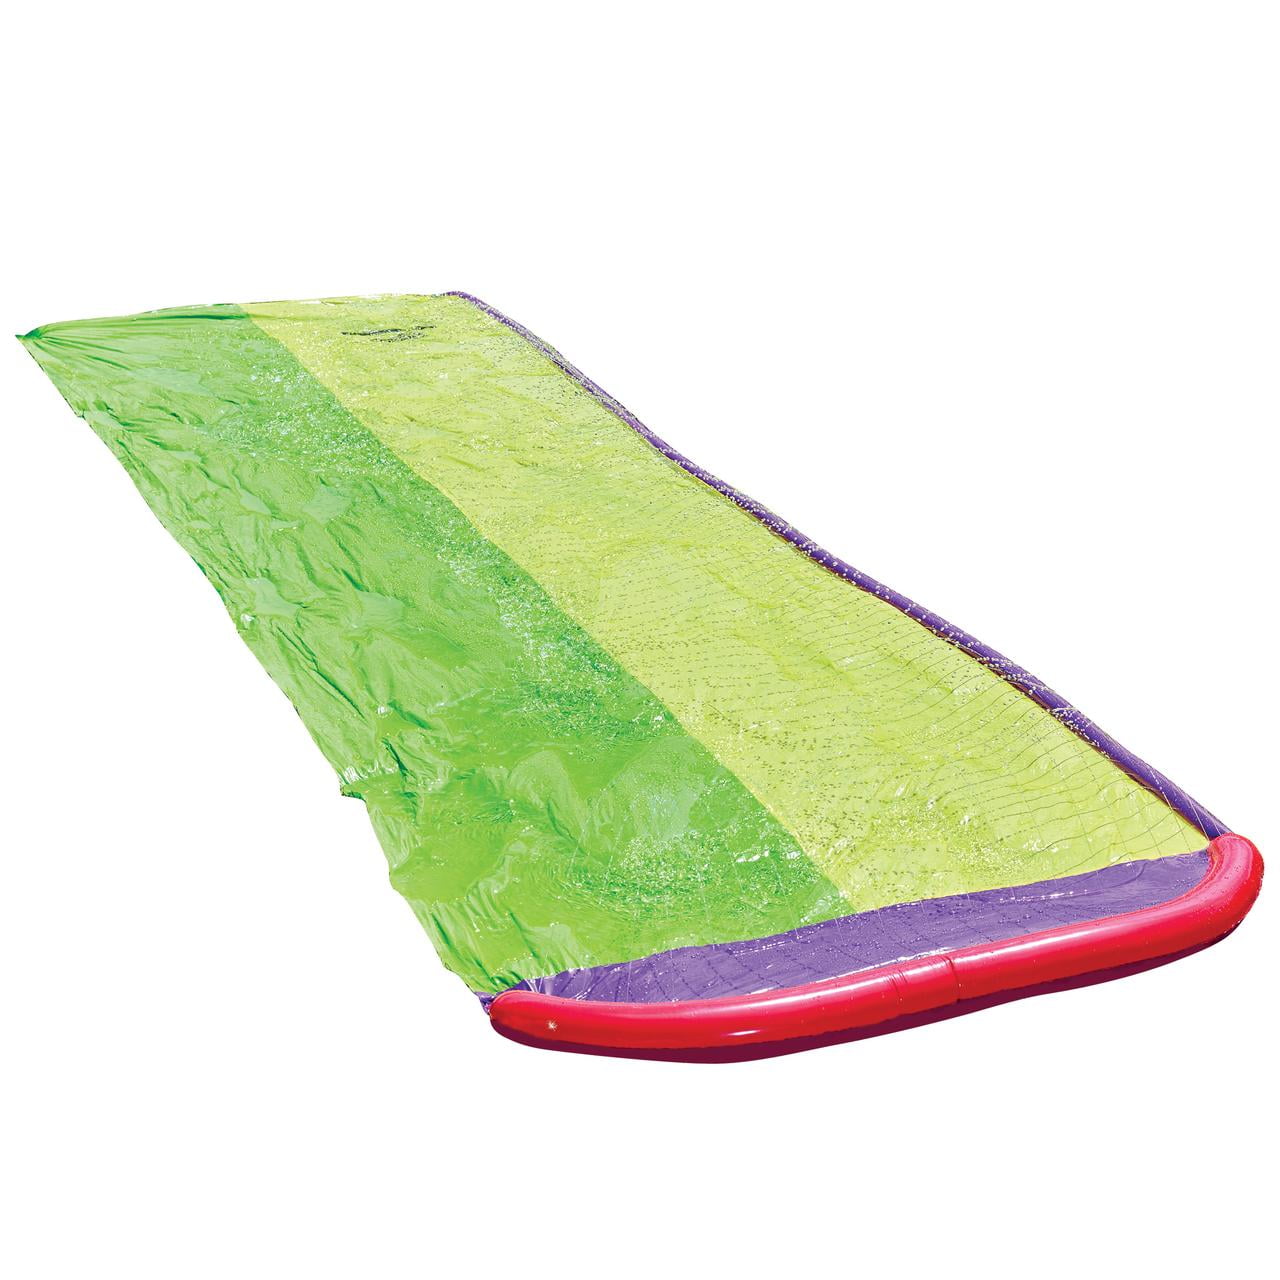 Wham-O Slip N Slide Wave Rider Double With 2 Slide Boogies 16ft for sale online 